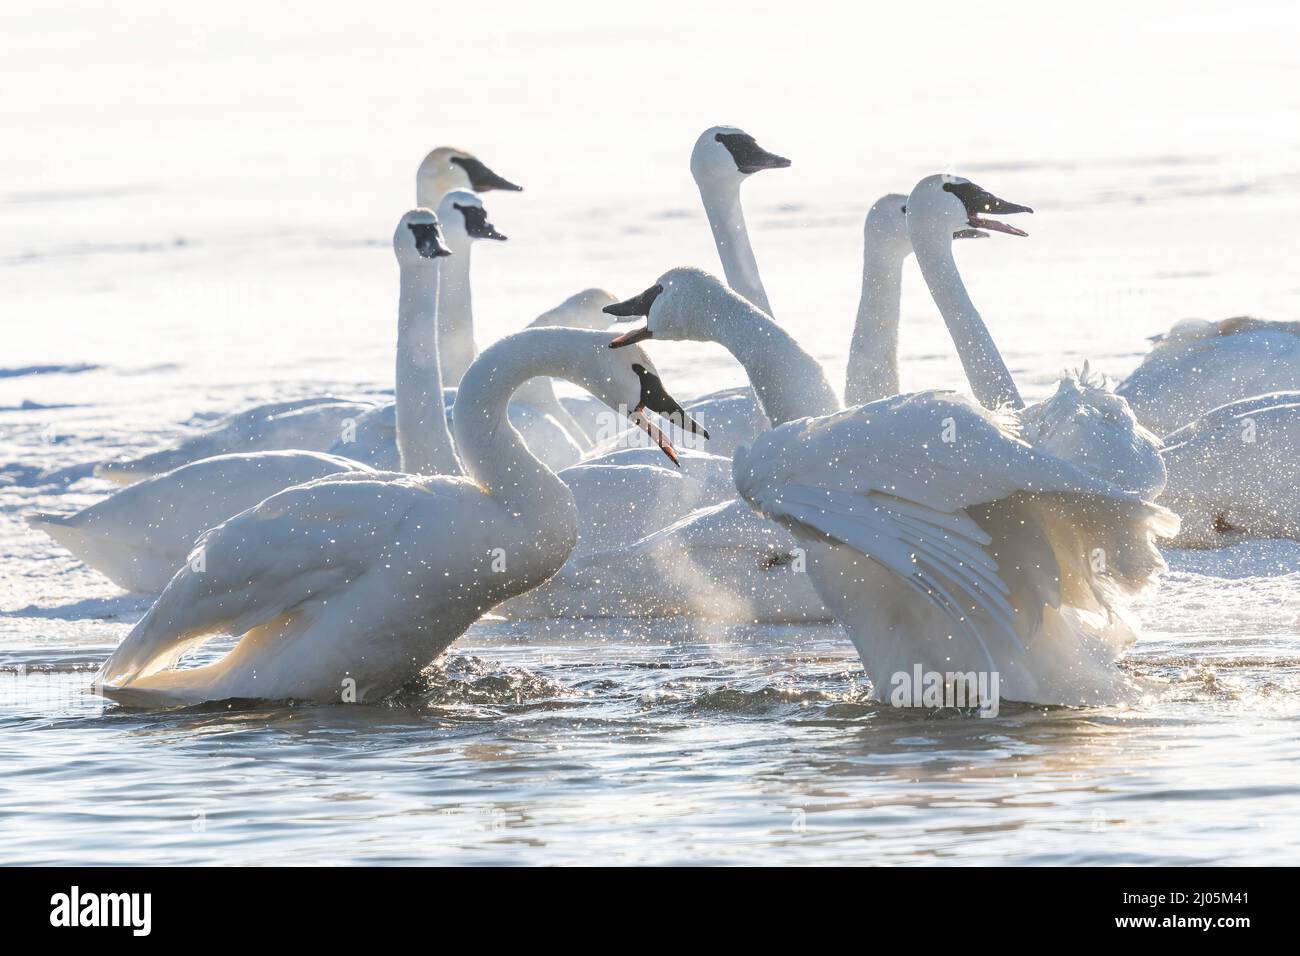 Trumpeter swans acting aggressive, (Cygnus buccinator). St. Croix river, WI, USA, by Dominique Braud/Dembinsky Photo Assoc Stock Photo